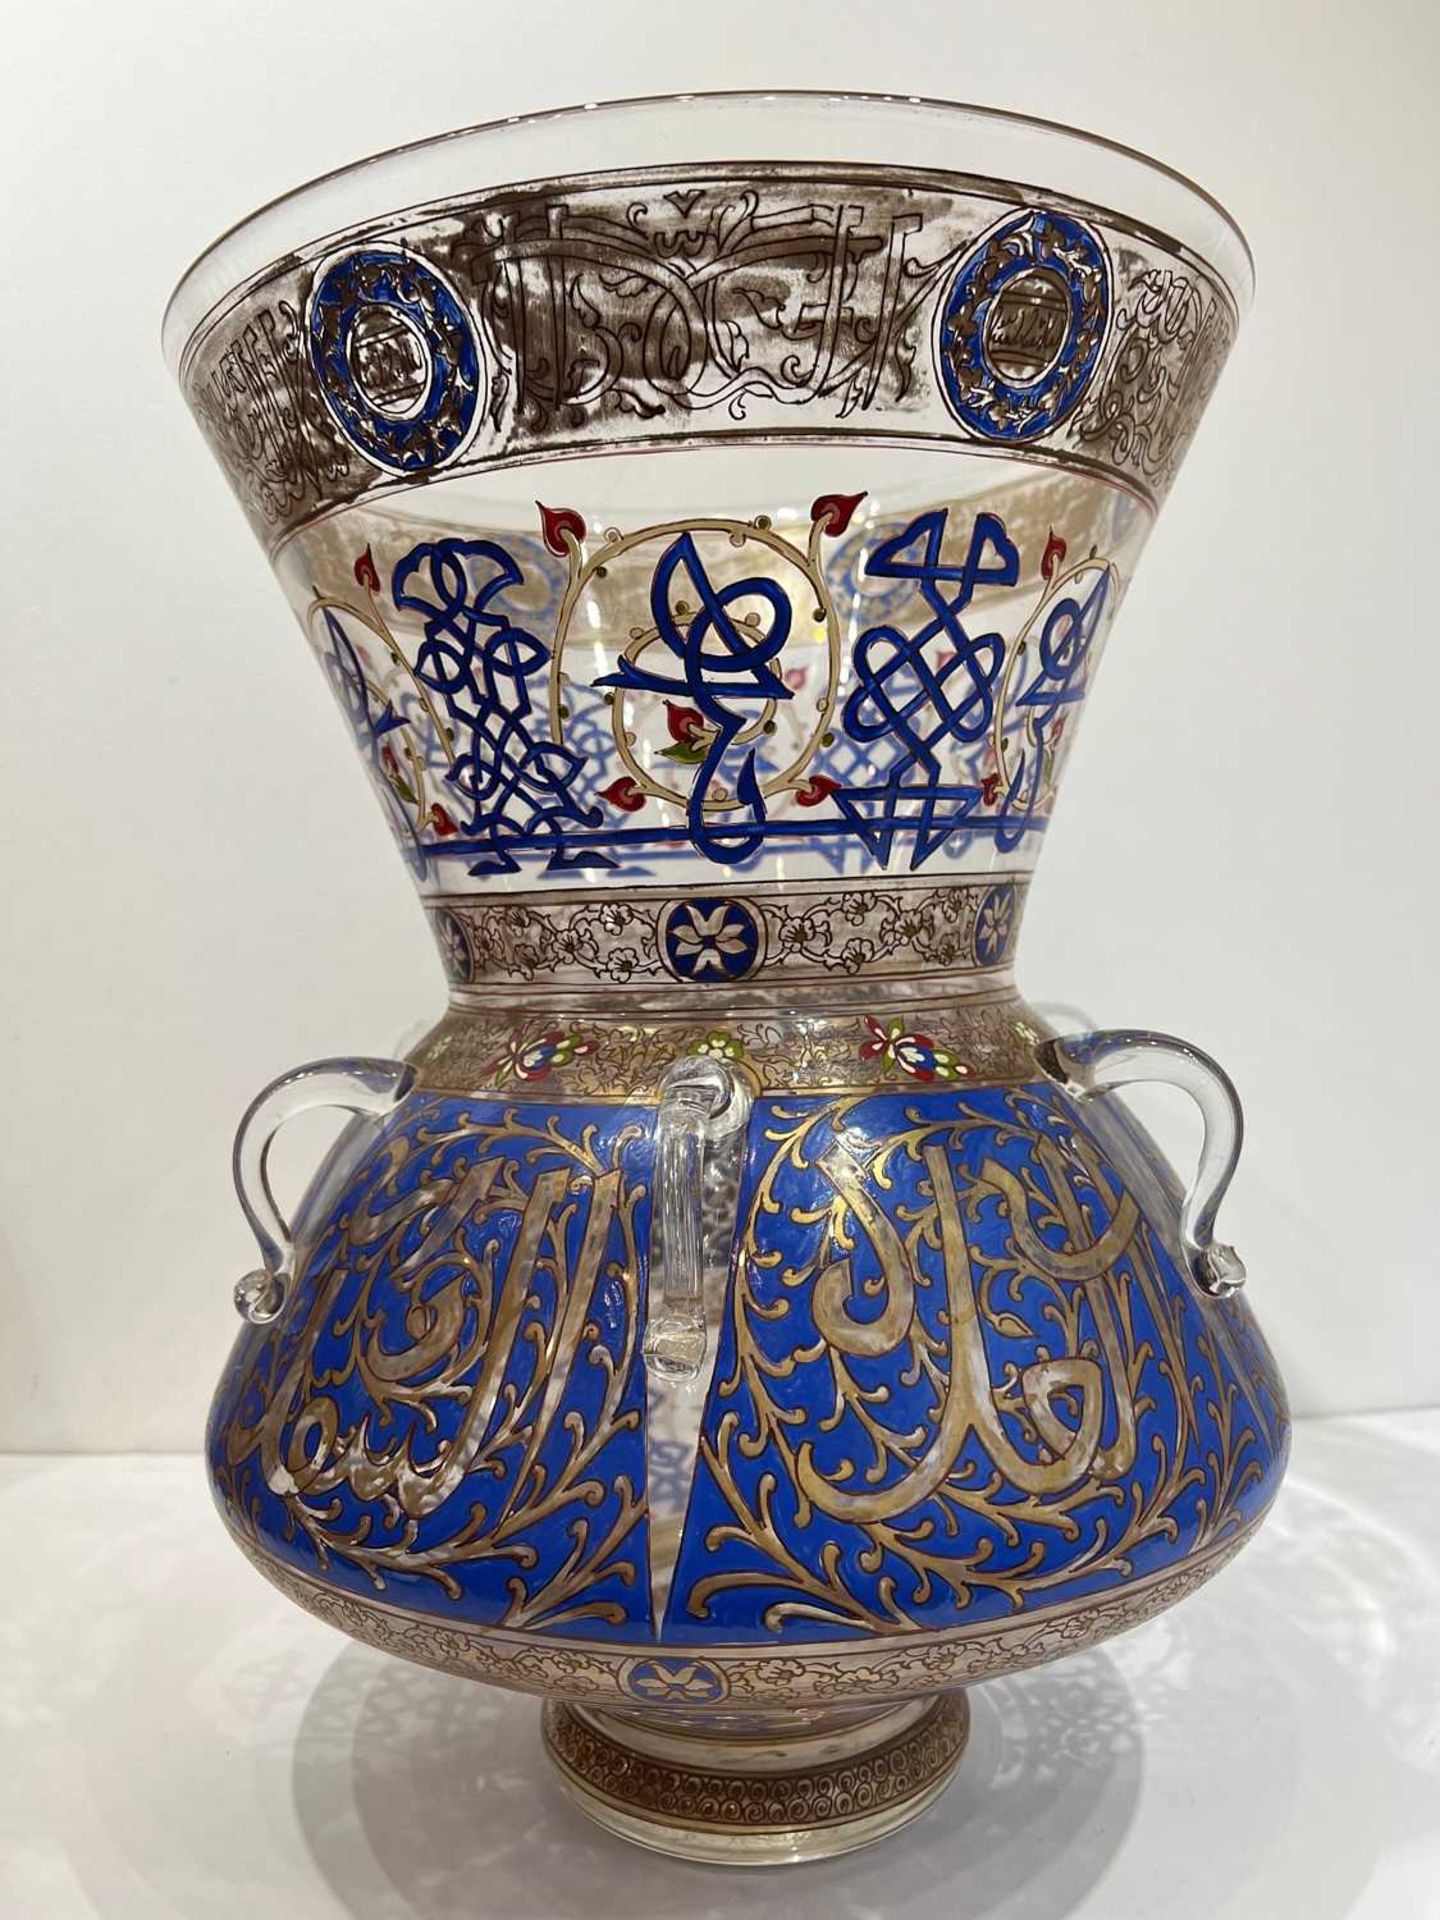 A LARGE MAMLUK REVIVAL ENAMELLED GLASS MOSQUE LAMP IN THE MANNER OF BROCARD - Image 9 of 9